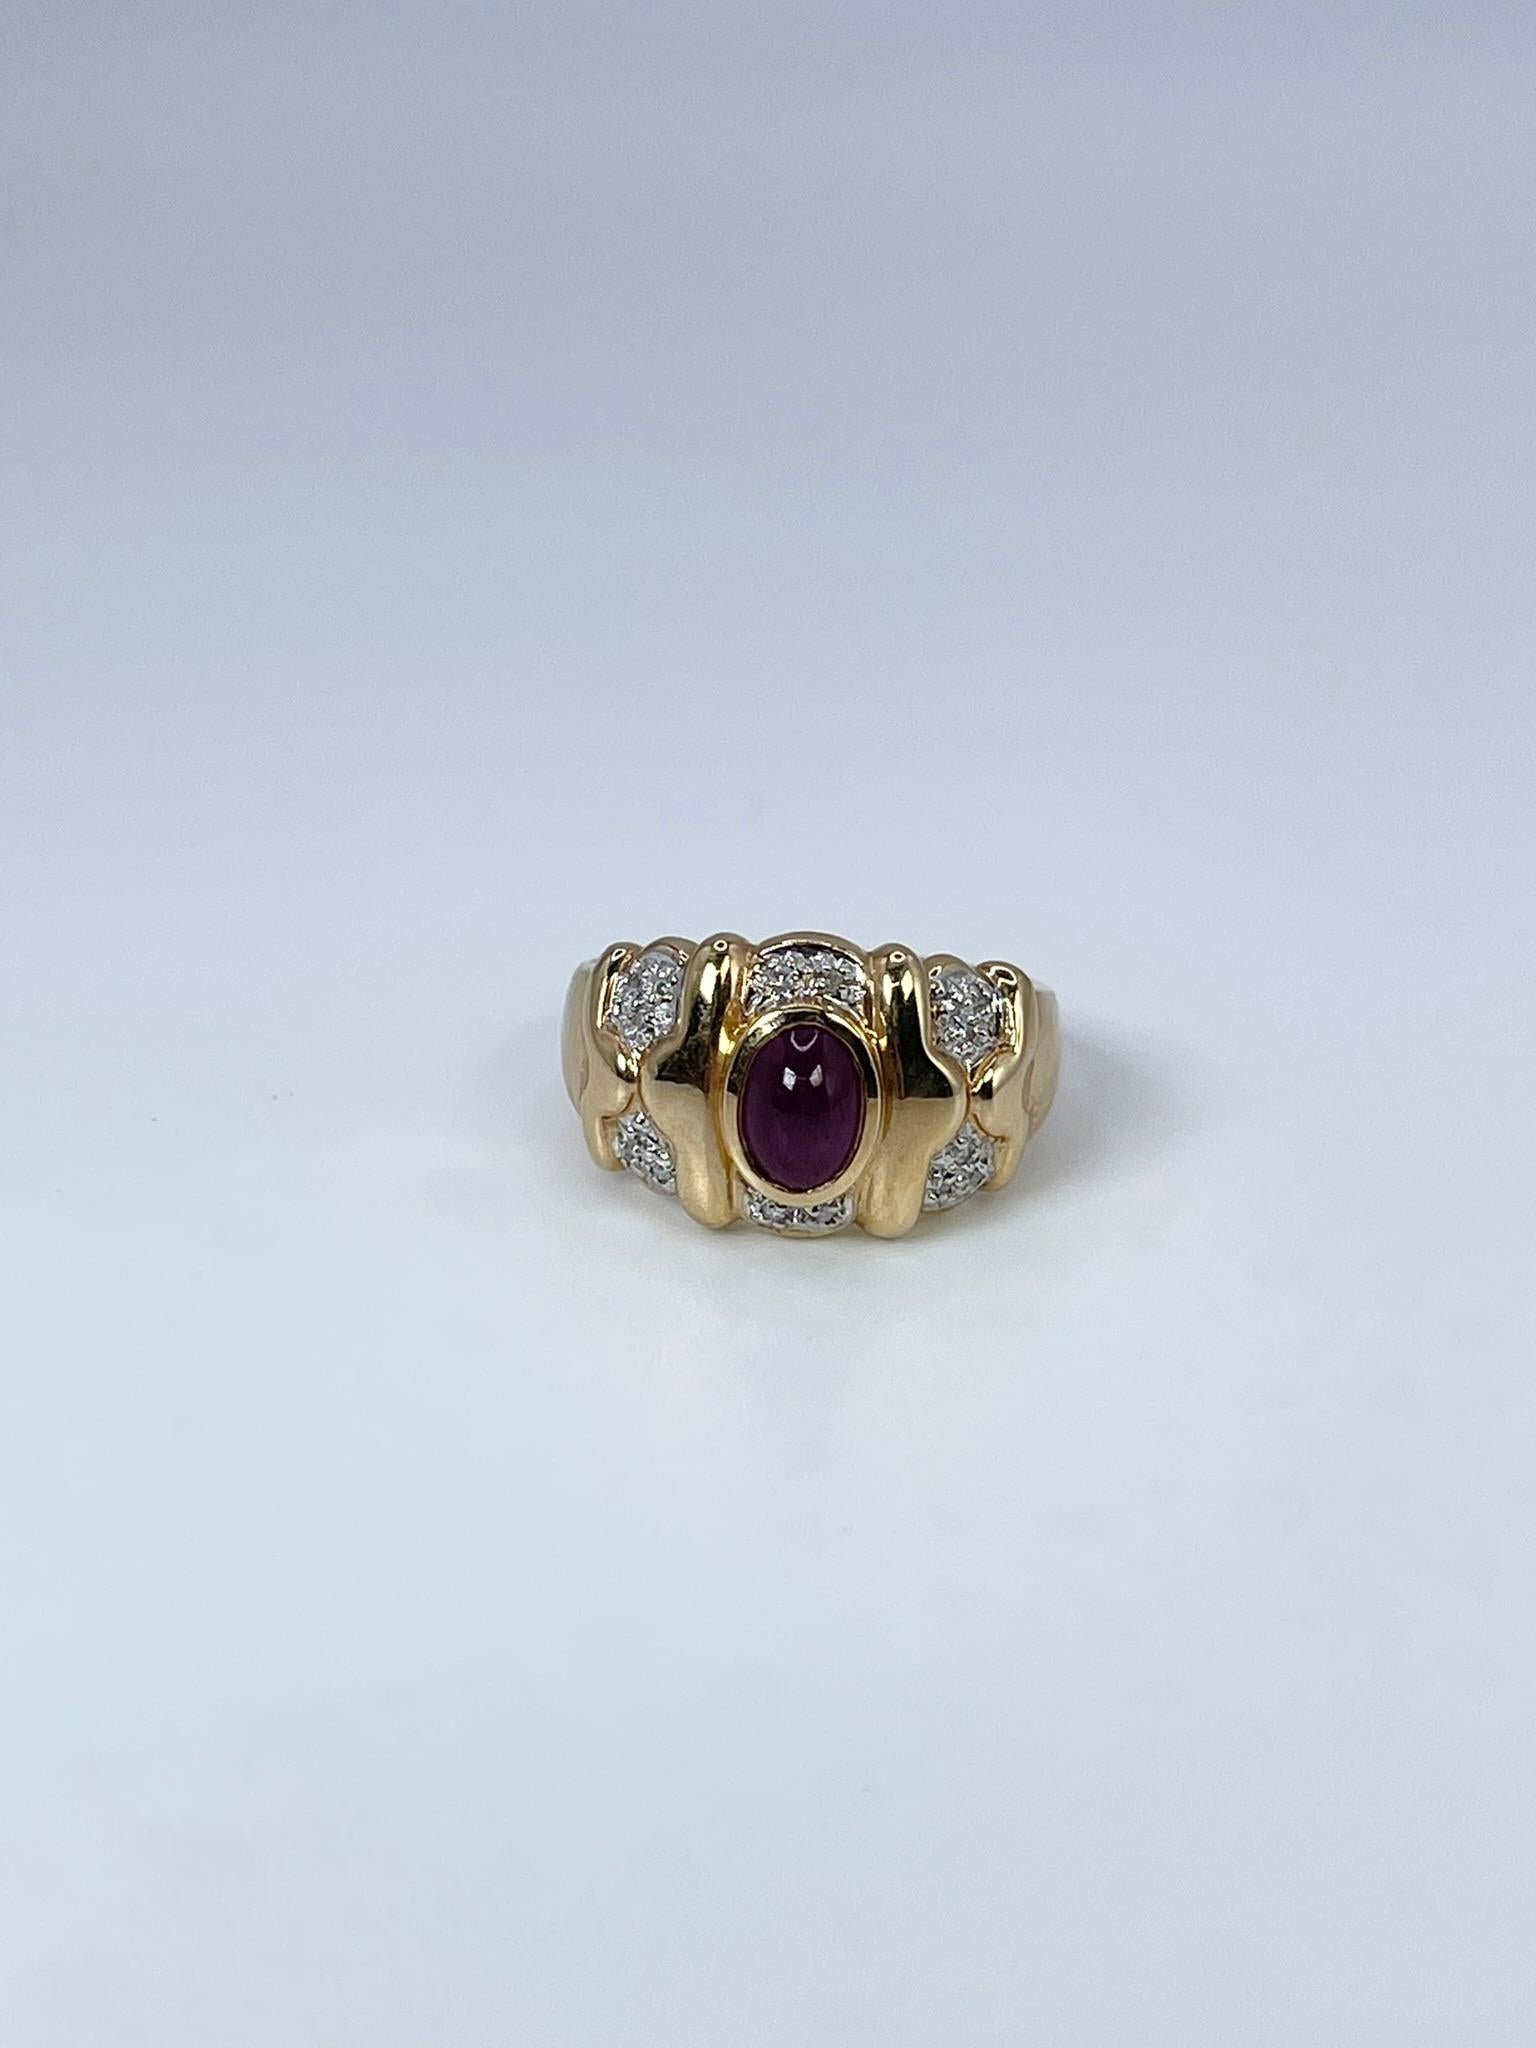 Stunning ruby & diamond cocktail ring made with oval cabochon (100% natural and untreated ruby) in 14KT yellow gold.

GRAM WEIGHT: 4.58gr
METAL: 14KT yellow gold

NATURAL DIAMOND(S)
Cut: Round
Color: H 
Clarity: SI (average)
Carat: 0.06ct

NATURAL